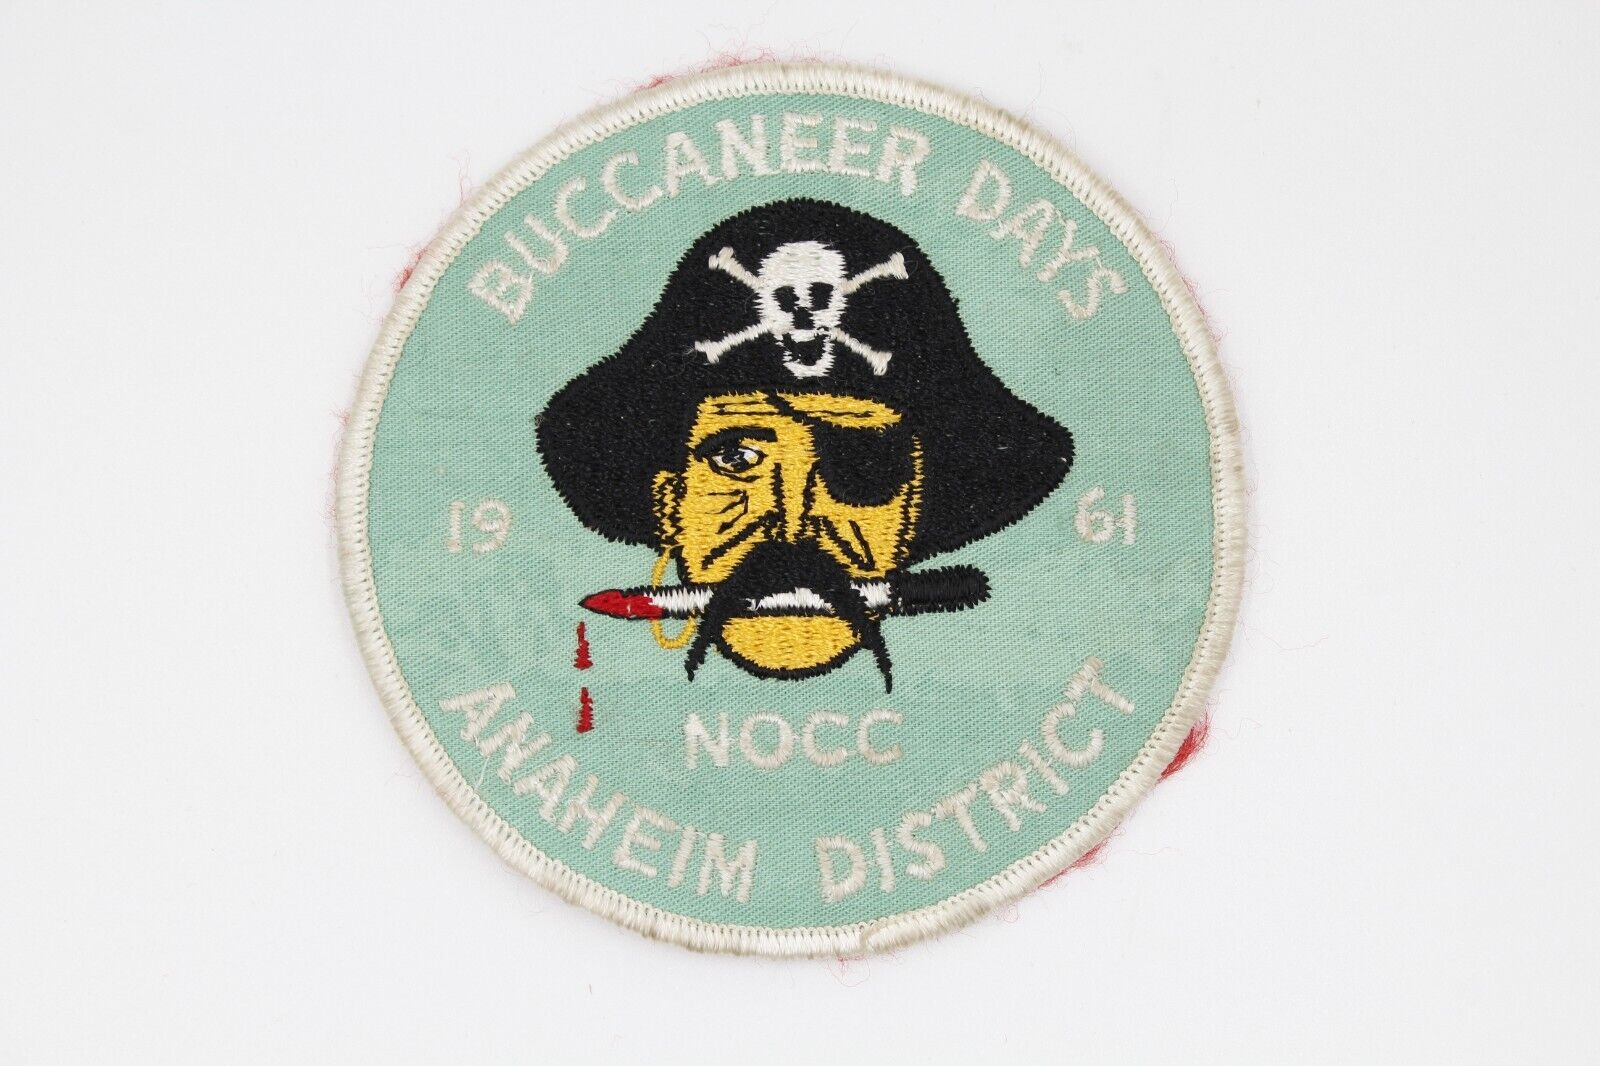 Vintage 1961 Buccaneer Days North Orange County Council Pirate Patch BSA CA